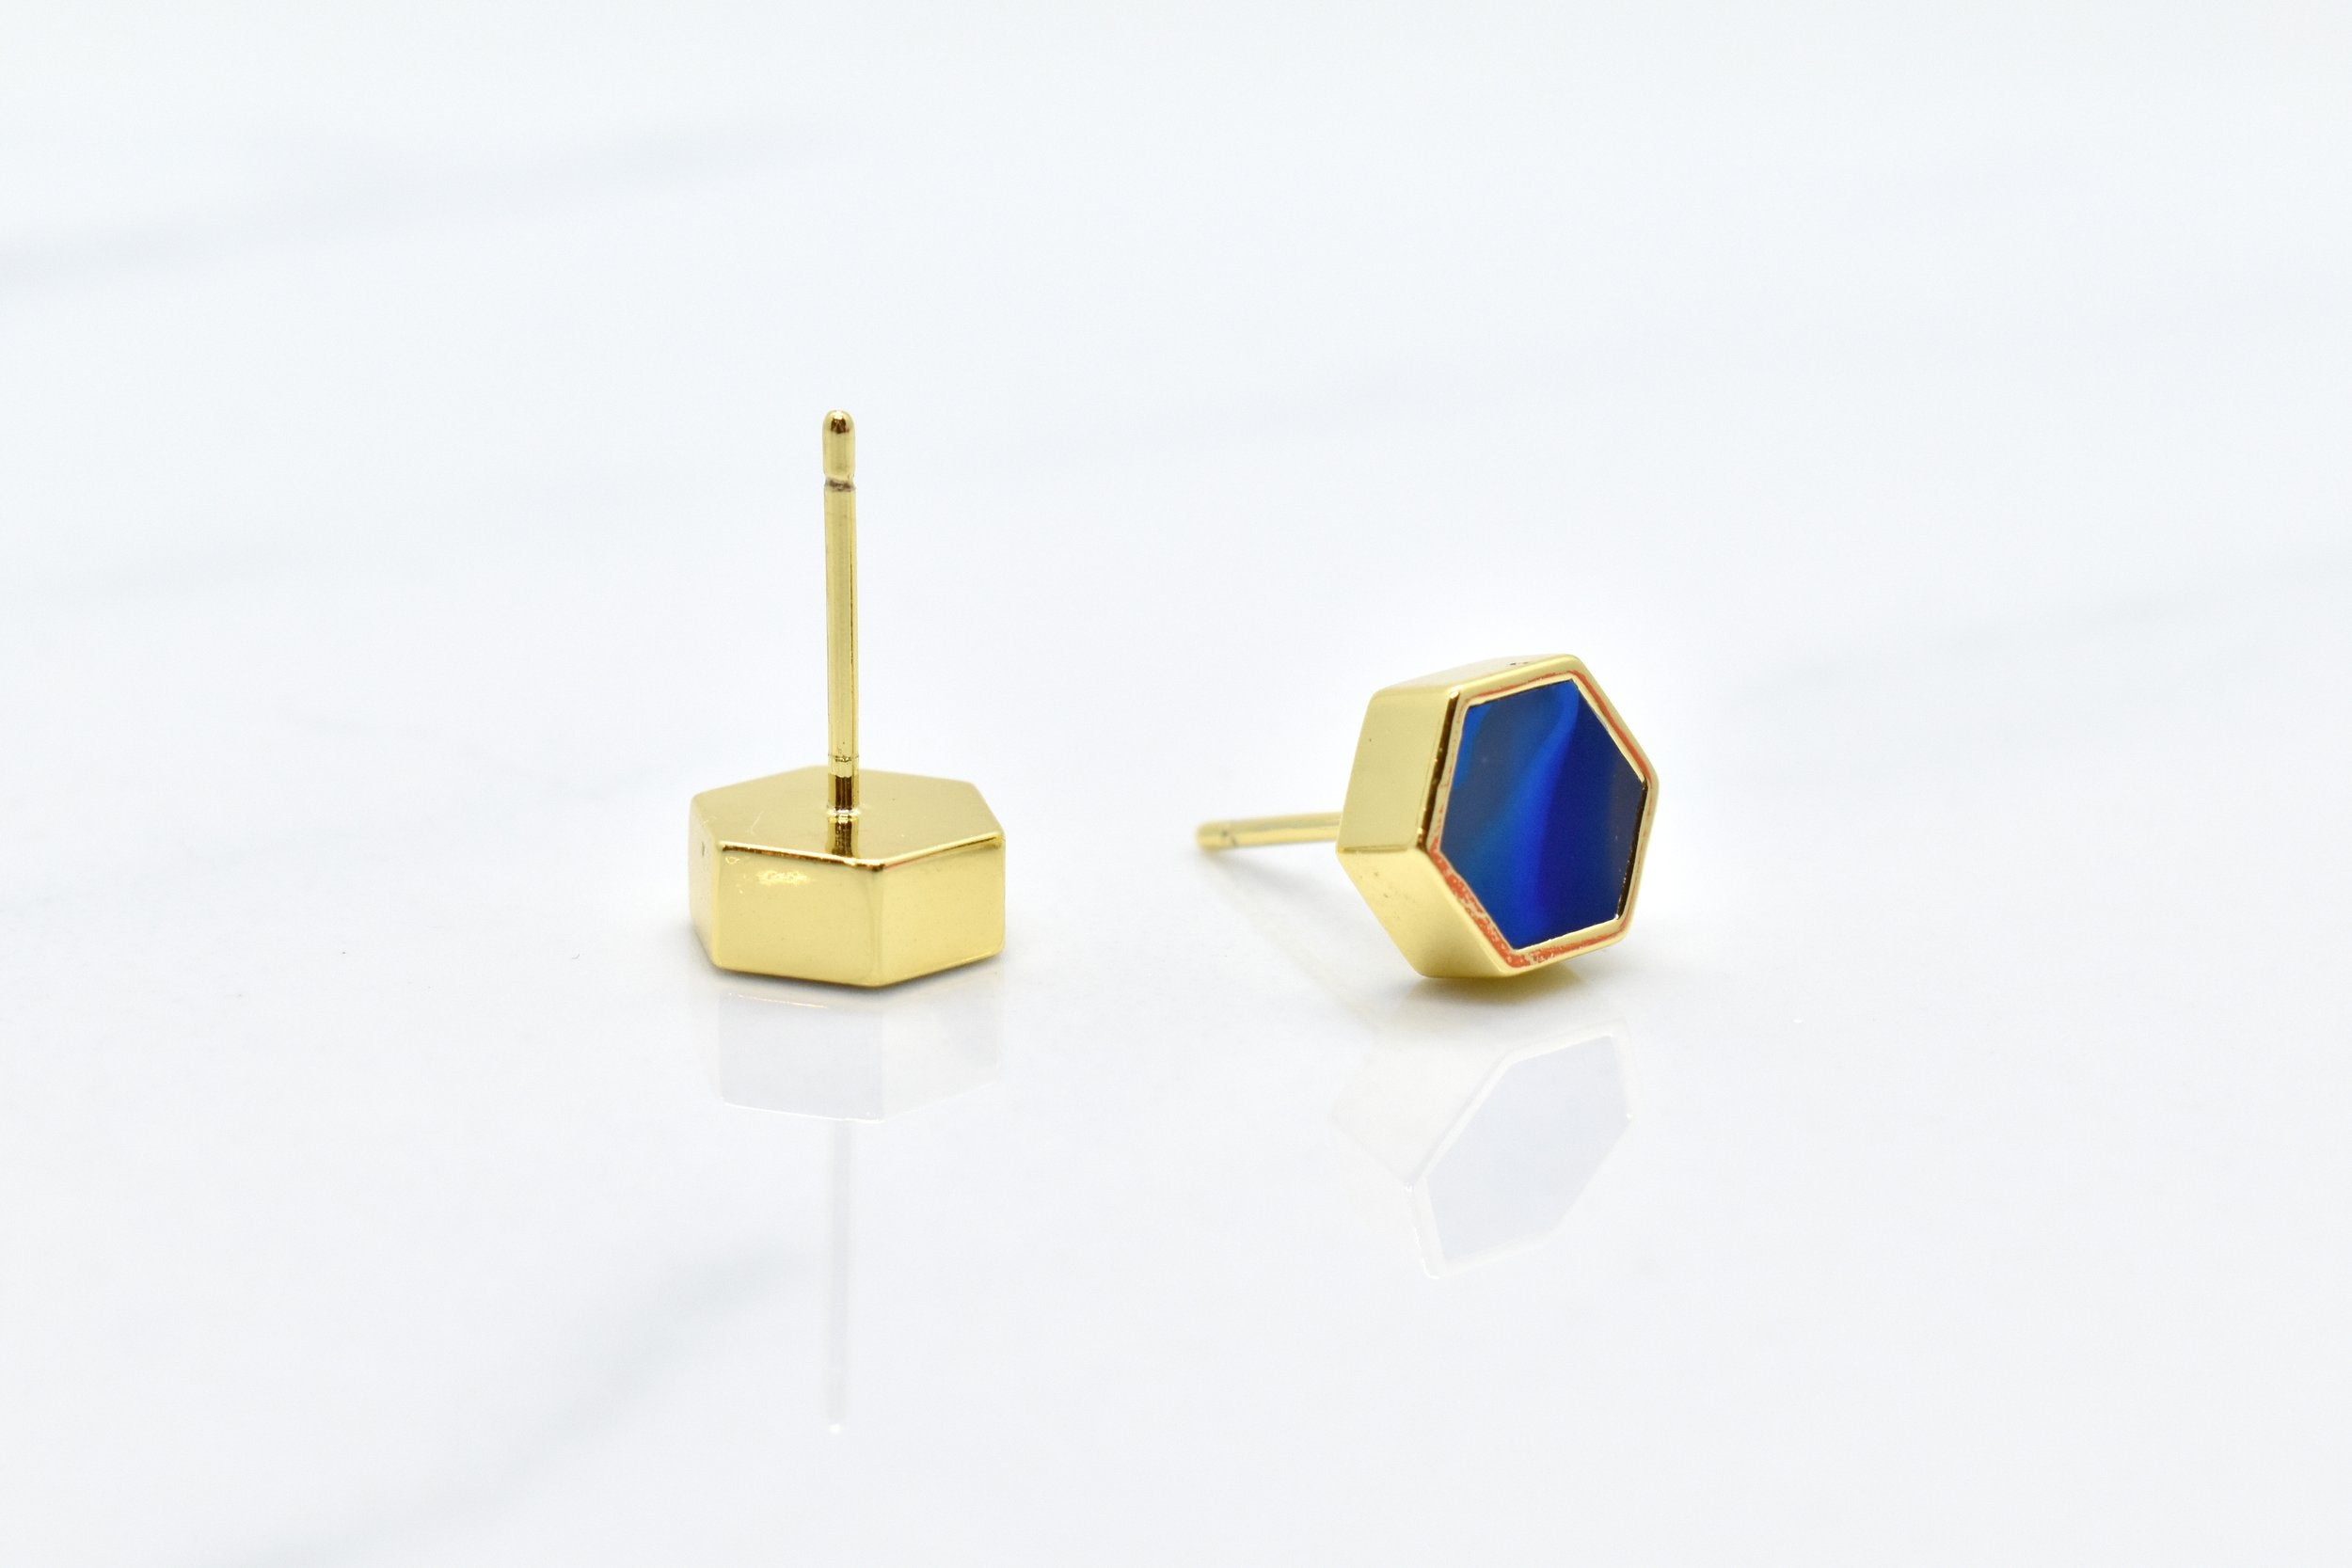 gold hexagon studs with back of stud and surgical steel posts that are hypoallergenic shown against a white background, includes 14k gold earrings with sapphire gem clay